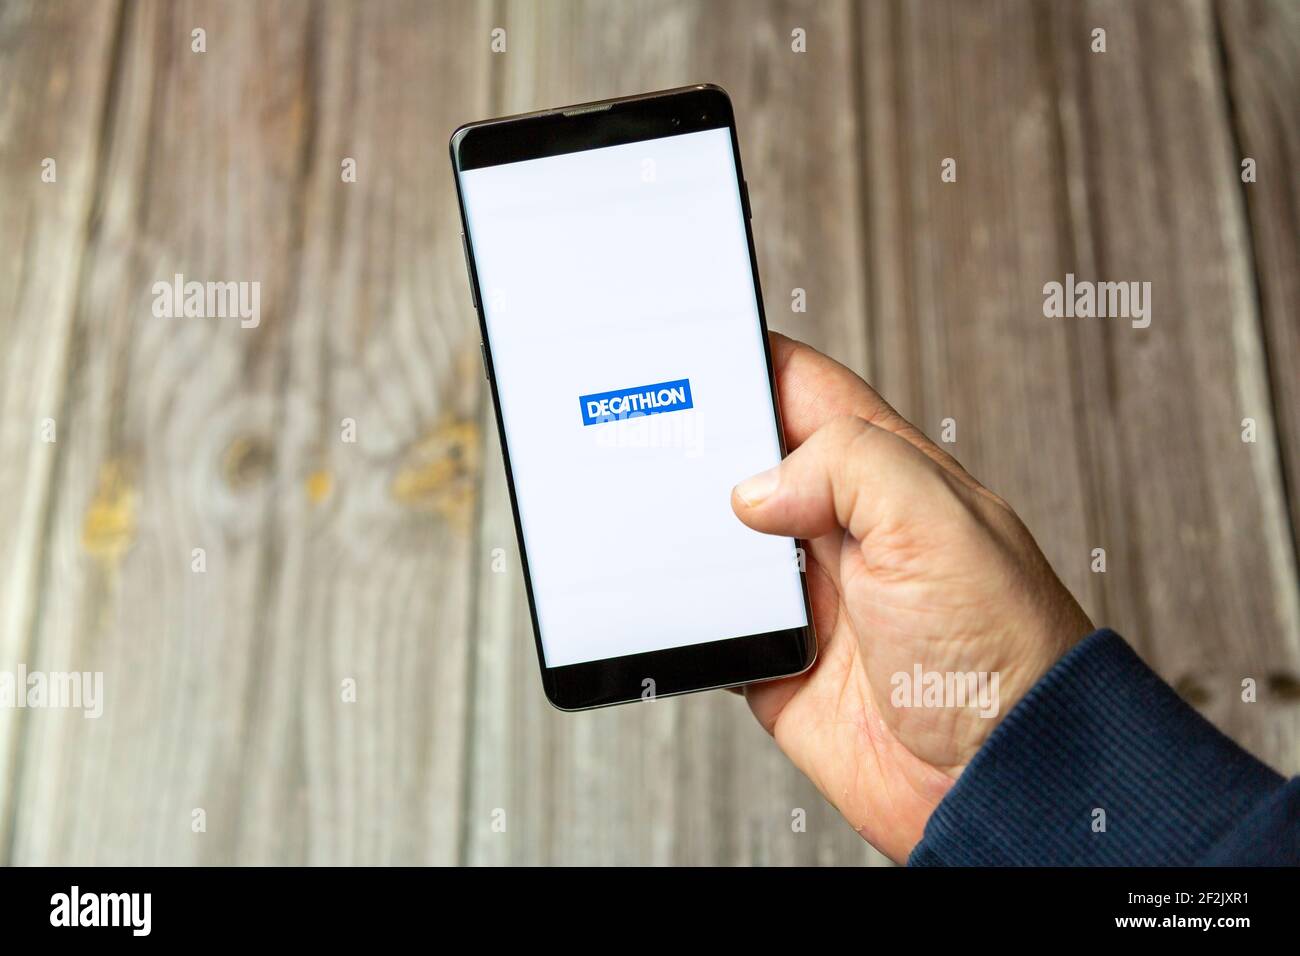 A Mobile phone or cell phone being held in a hand with the Decathlon app  open on screen Stock Photo - Alamy